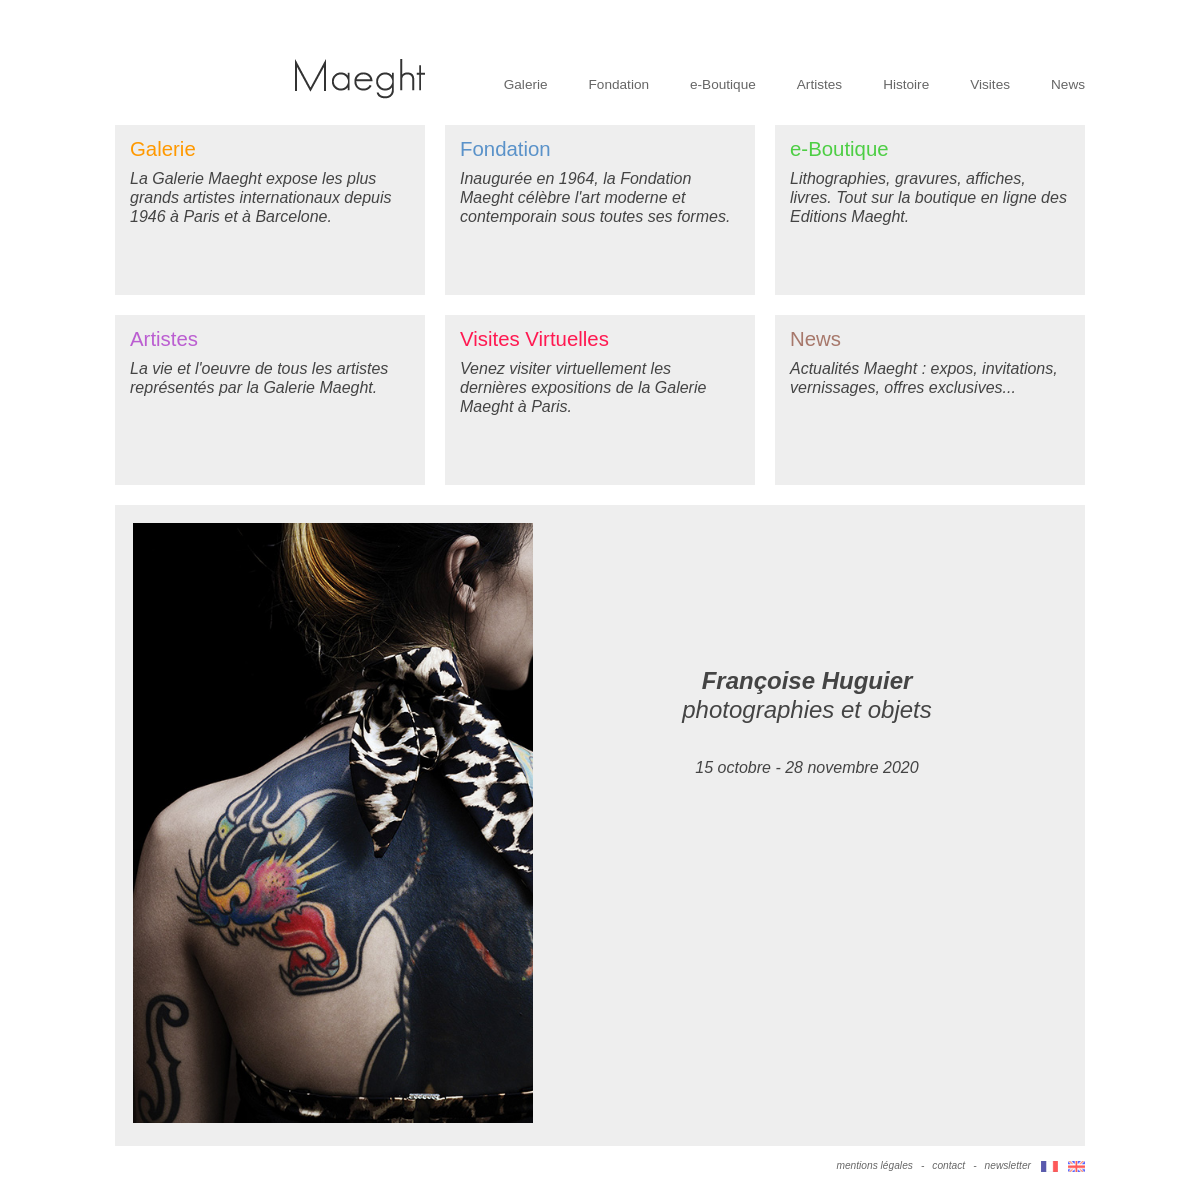 A complete backup of maeght.com